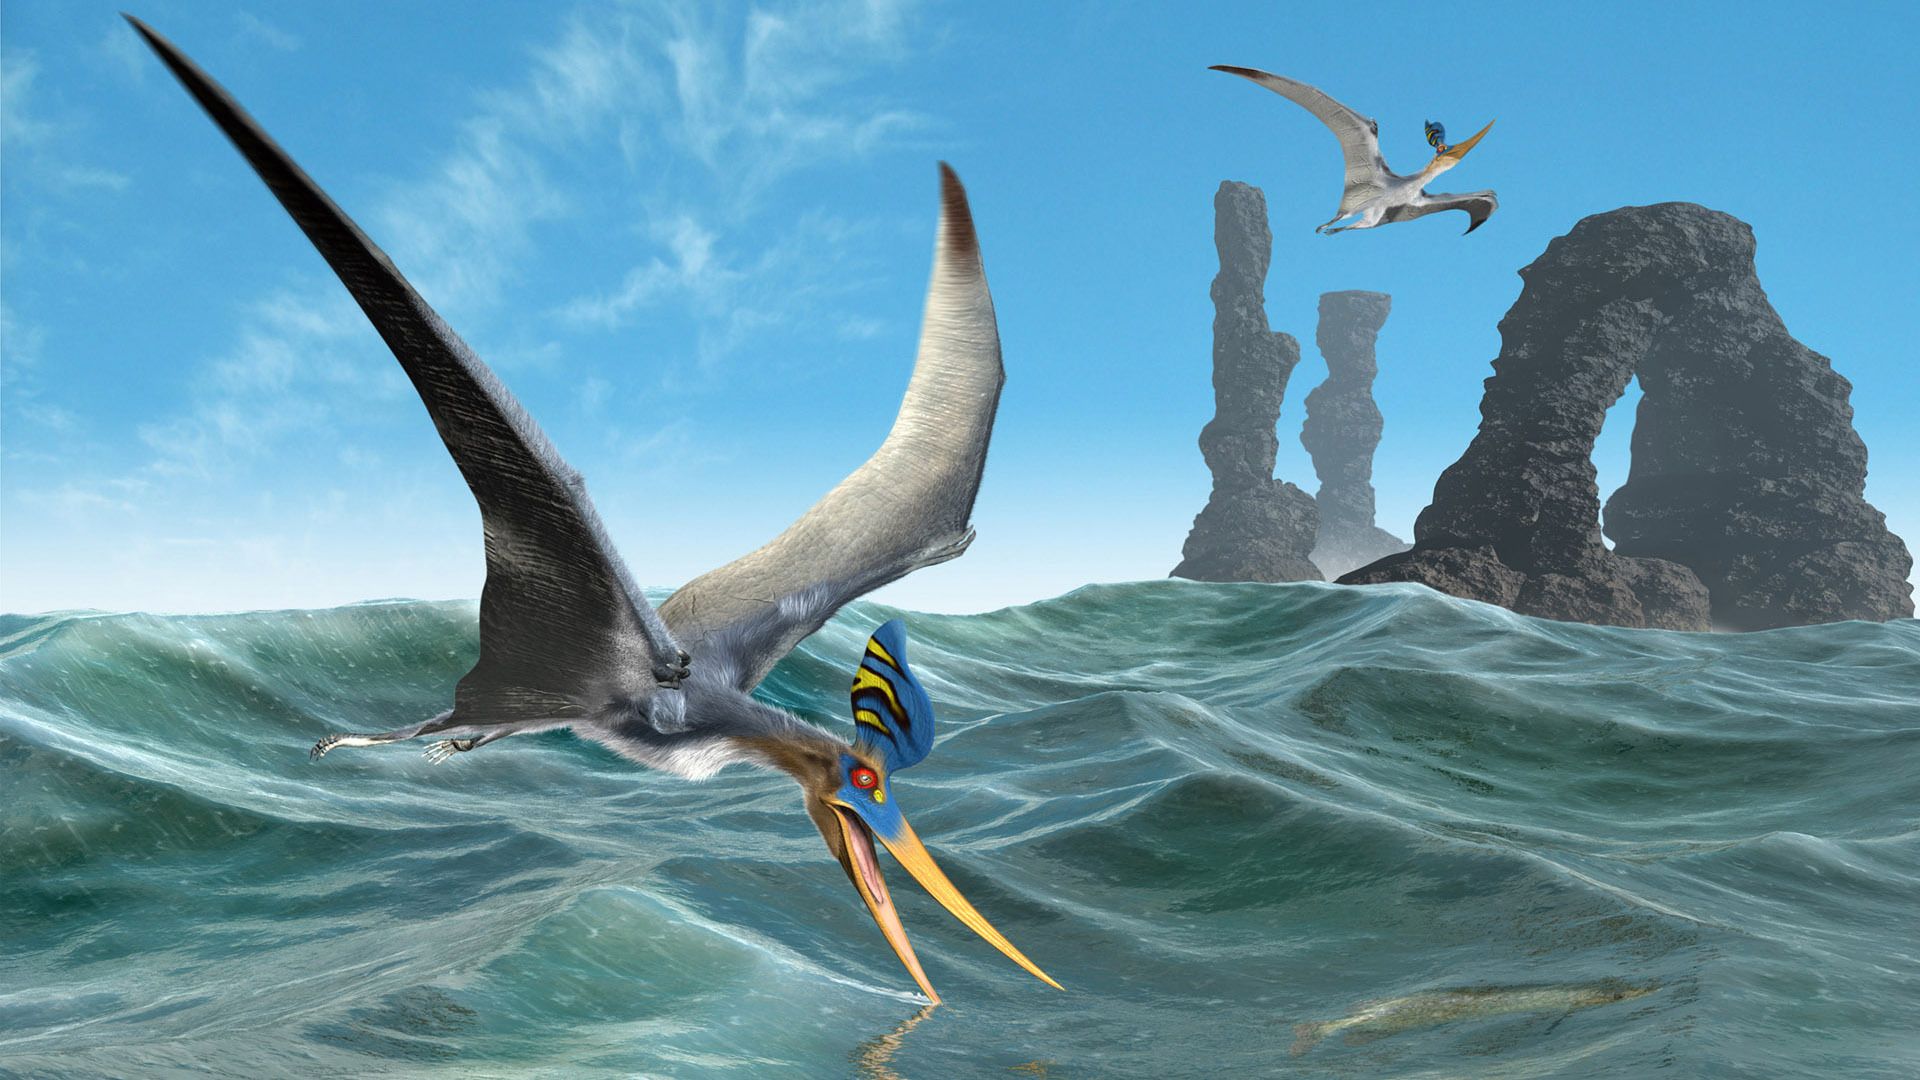 Flying over the sea dinosaurs wallpaper and image